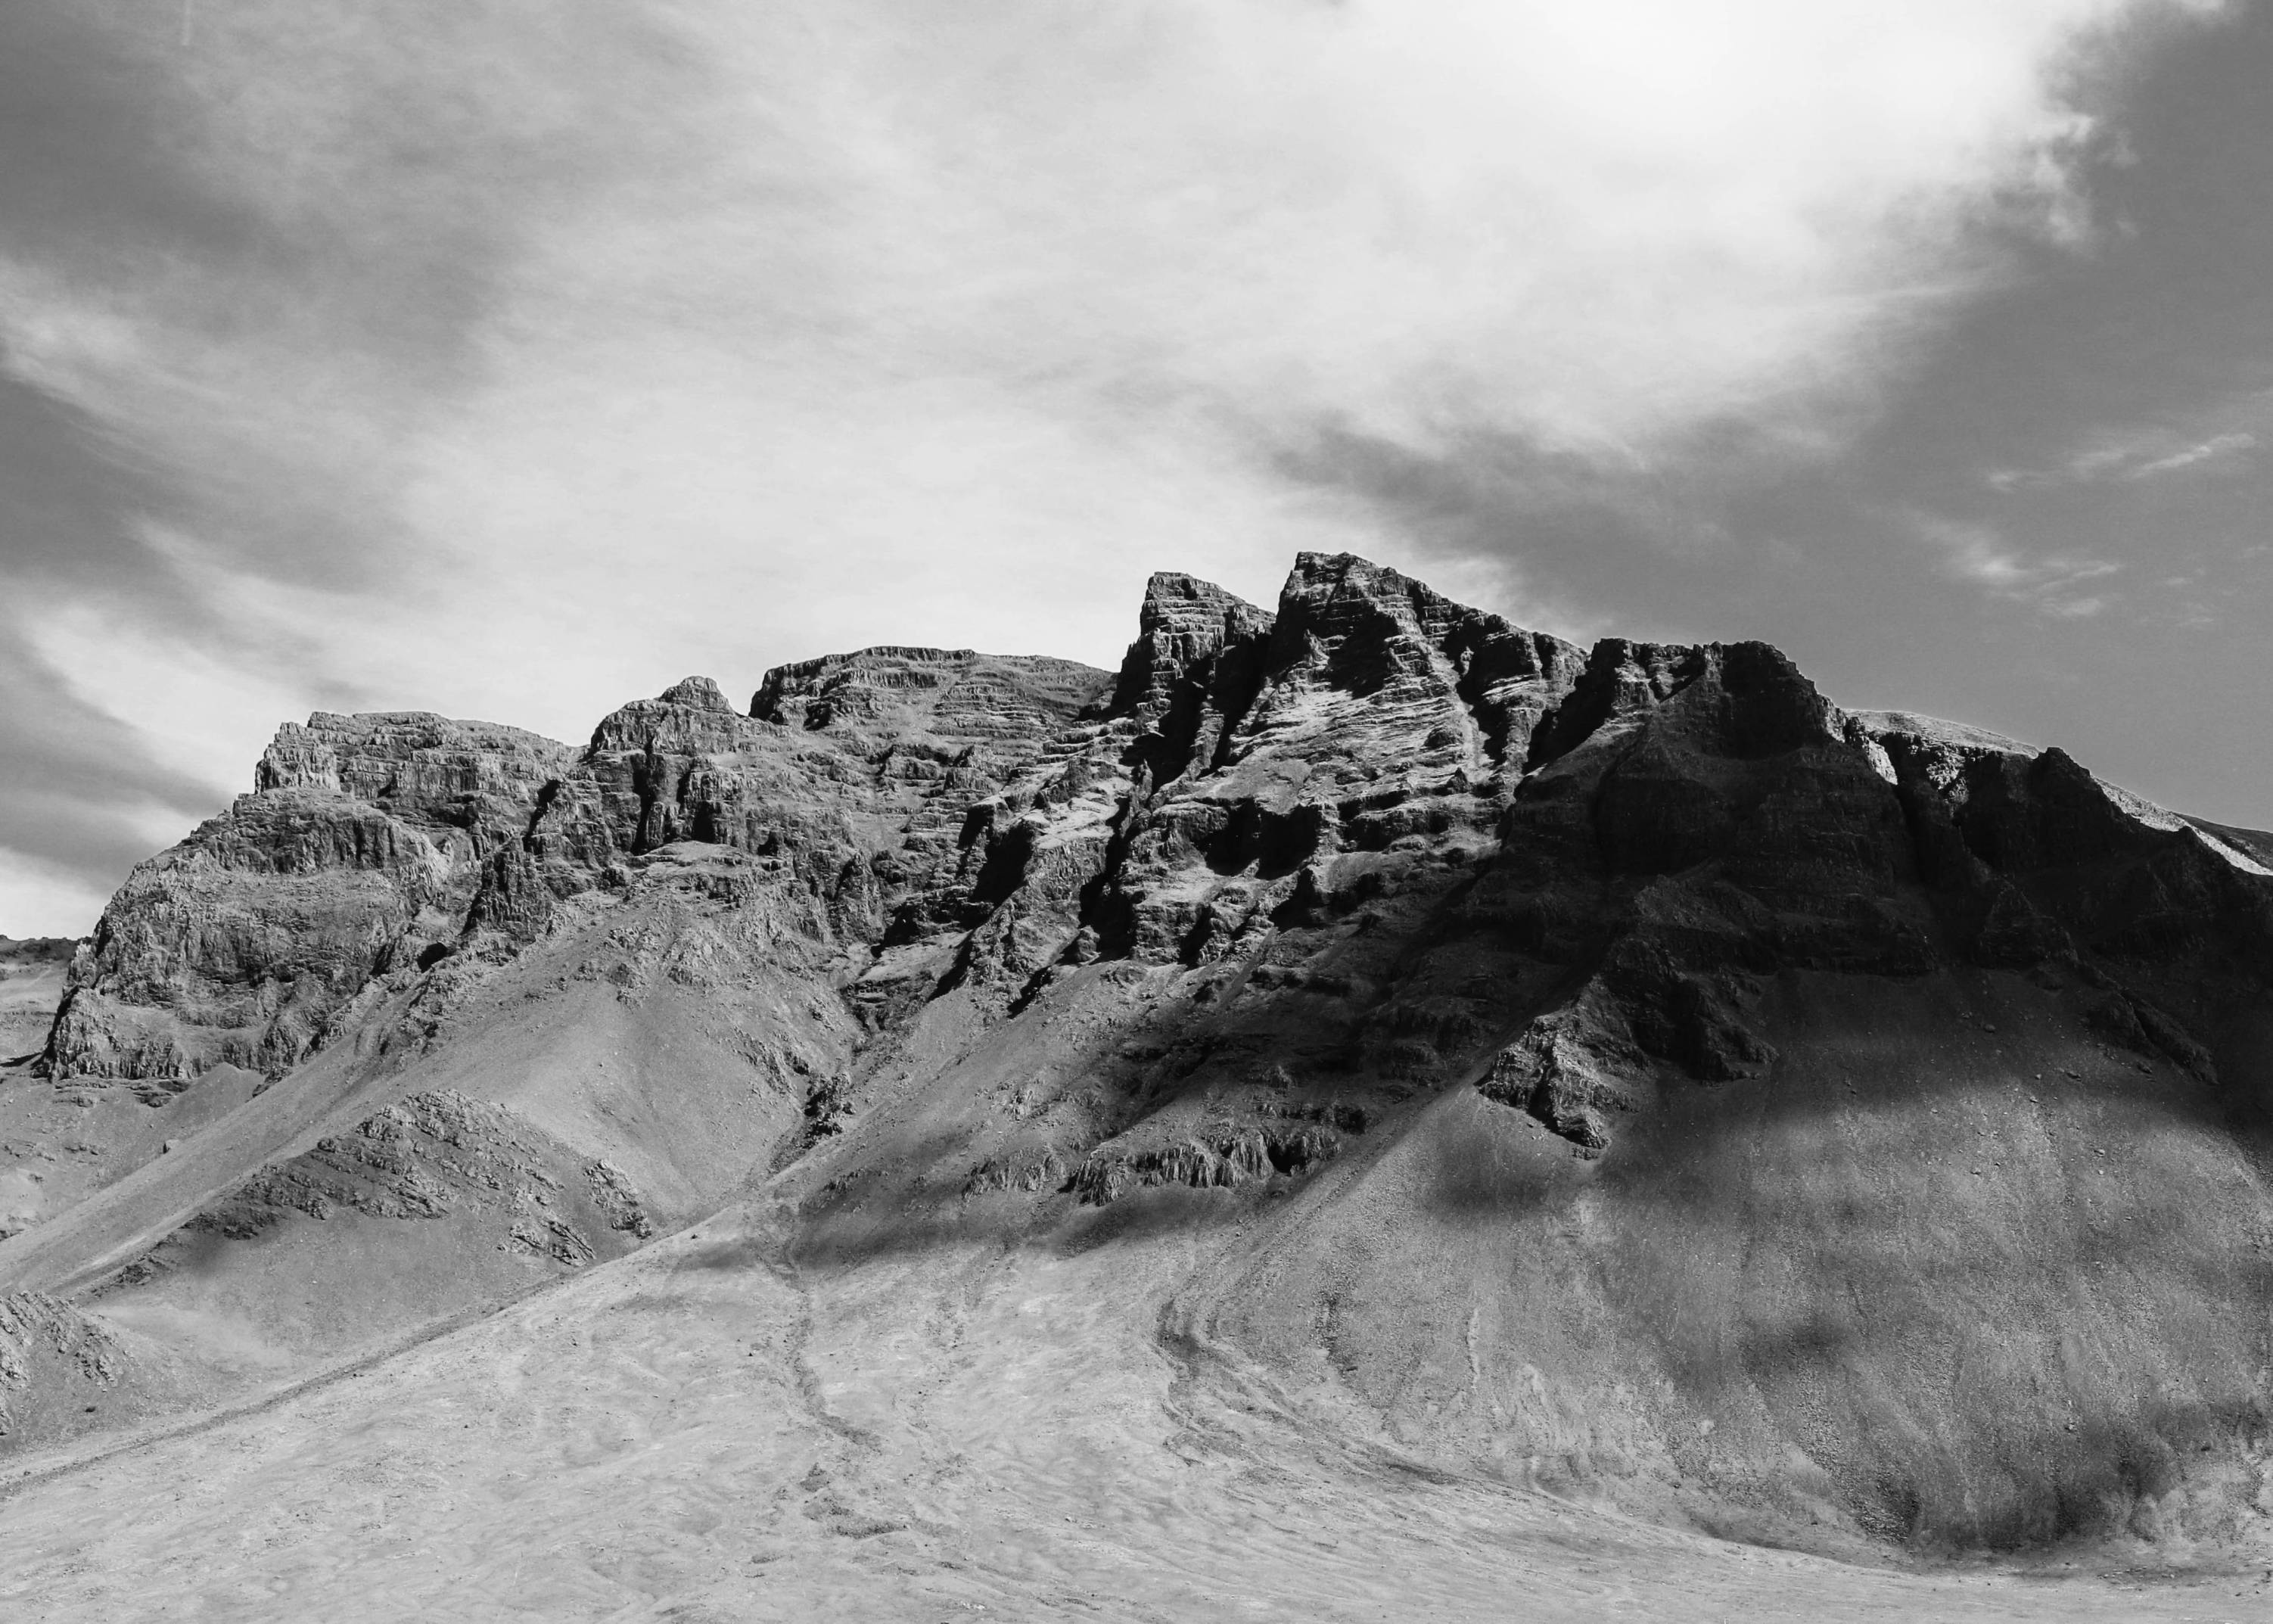 Mountain-in-iceland-black-and-white-photo-with-cloudy-skies-and-shadows-of-clouds-